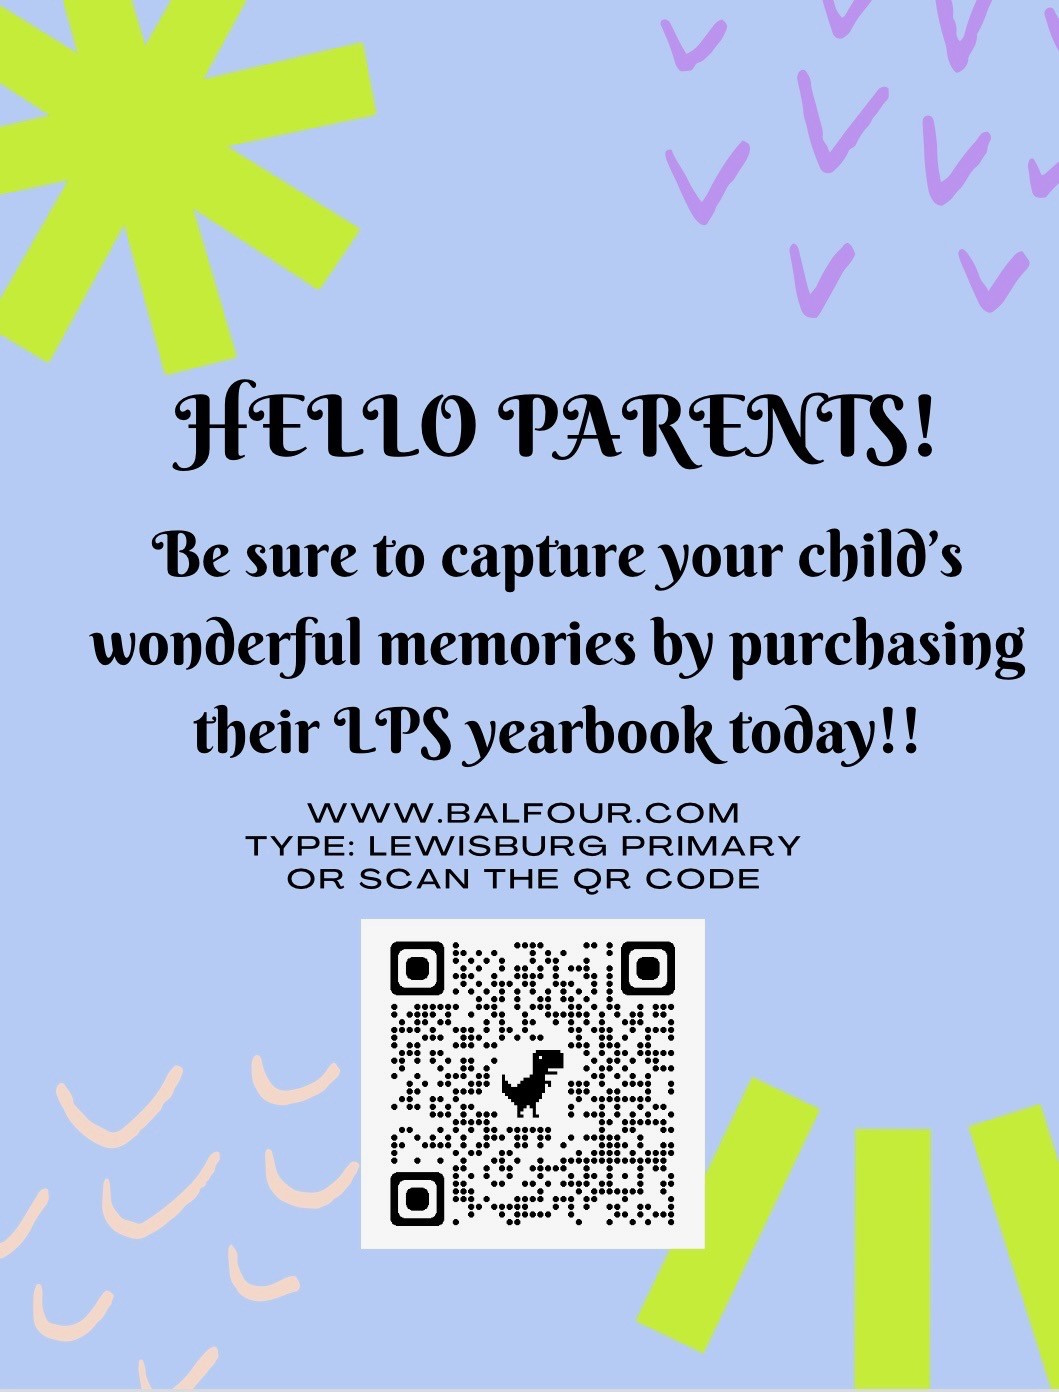 hello parents be sure to capture your child's wonderful memories by purchasing their yearbook! Click to order  from Balfour.